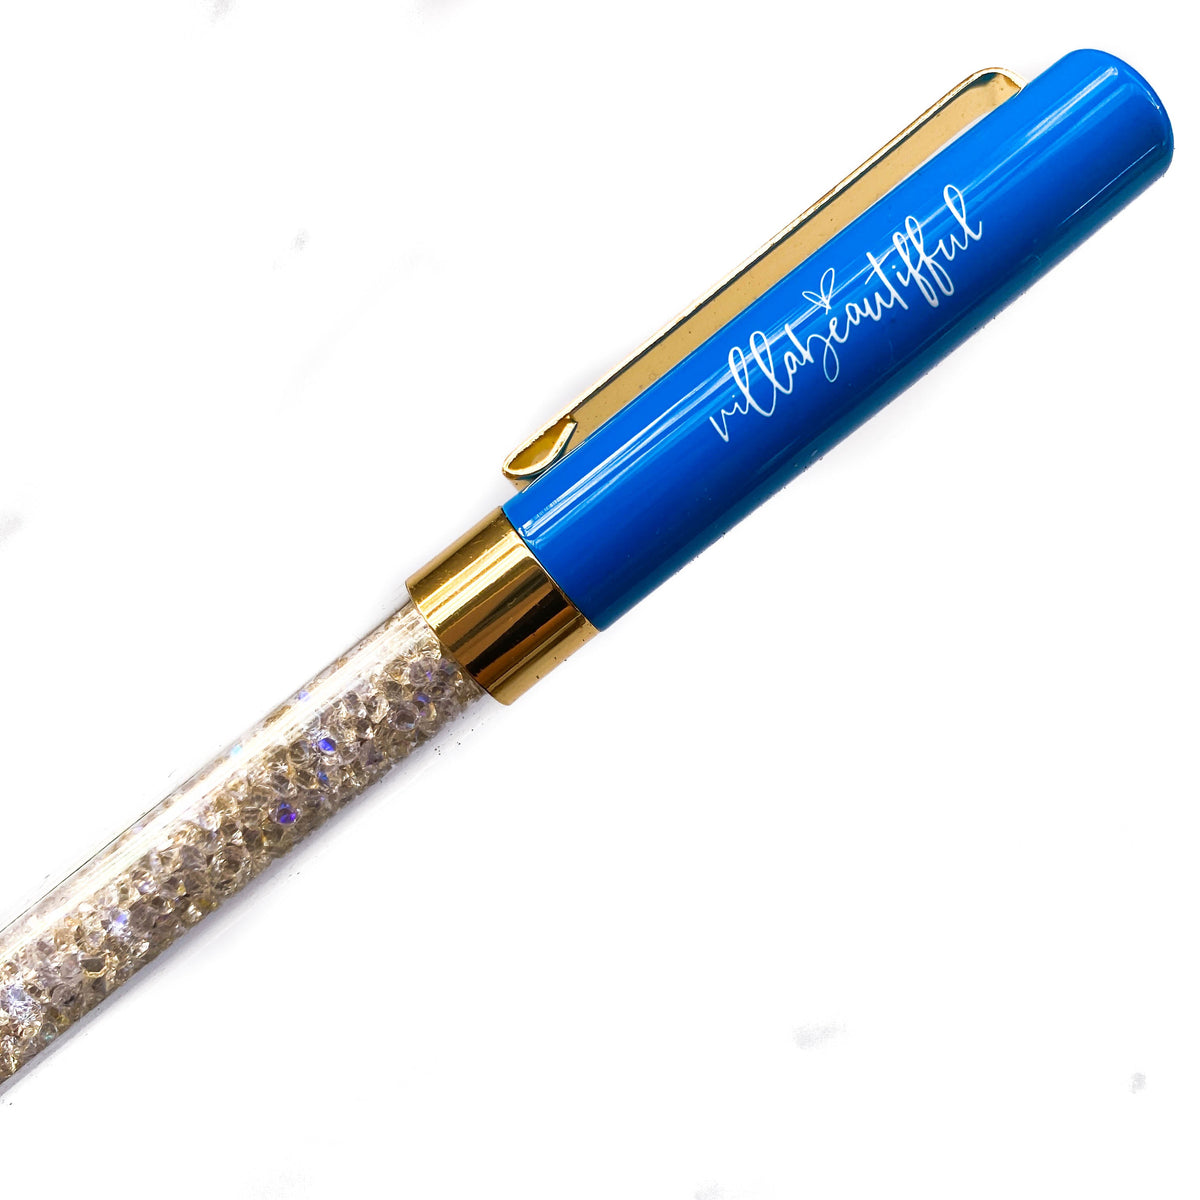 DoDo Air Imperfect Crystal VBPen | limited pen